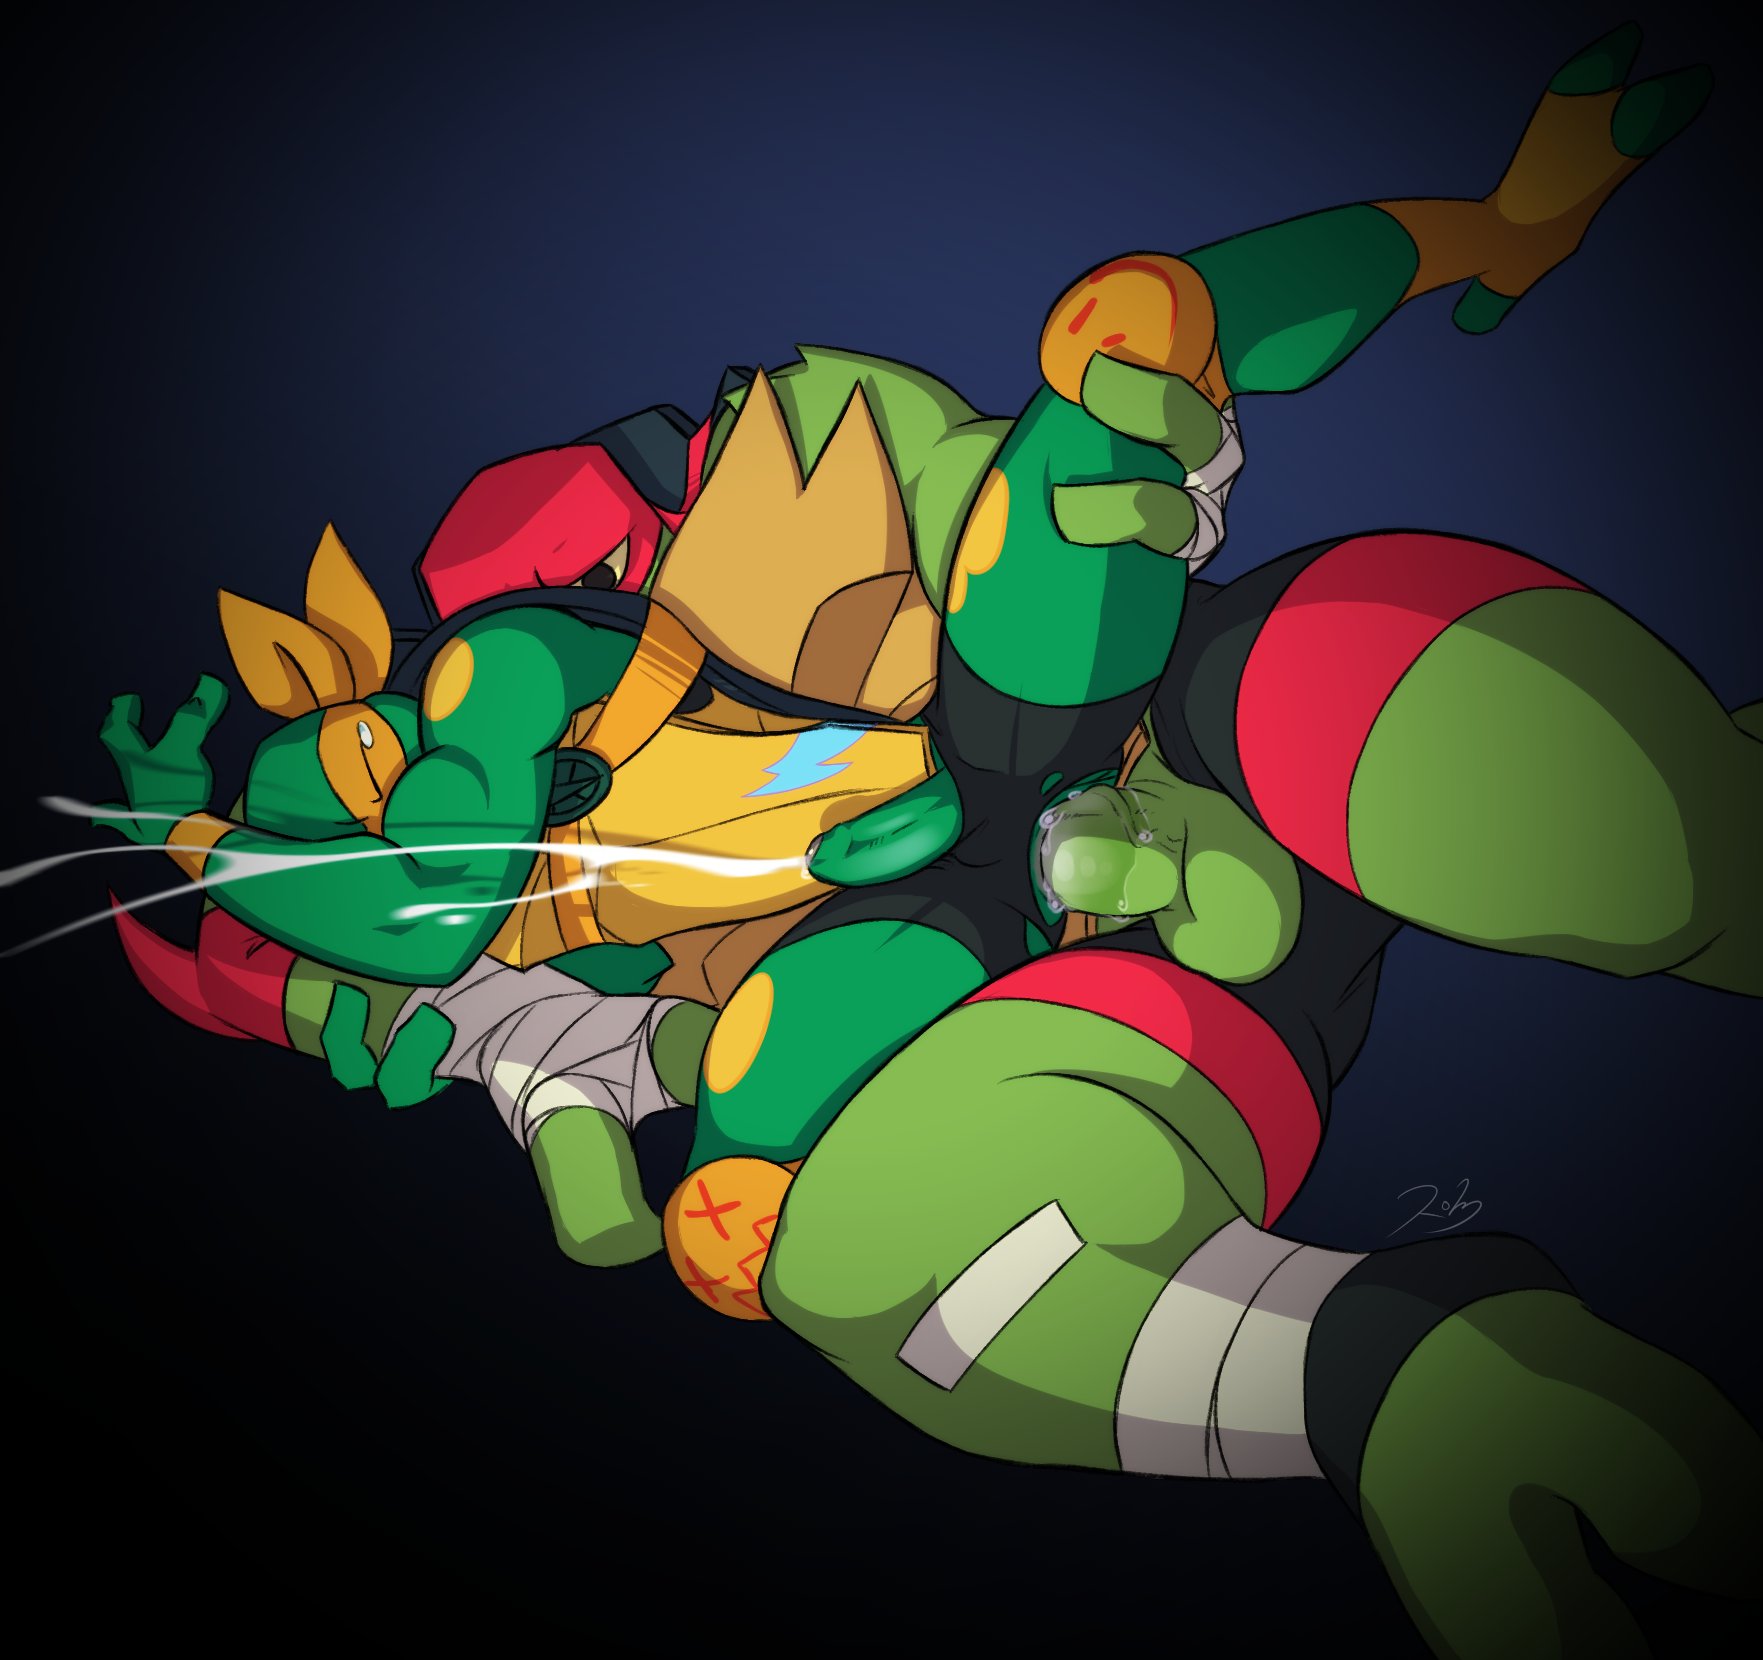 “"Cowabunga~!"
- Mikey from TMNT Gay Lewd RP&...